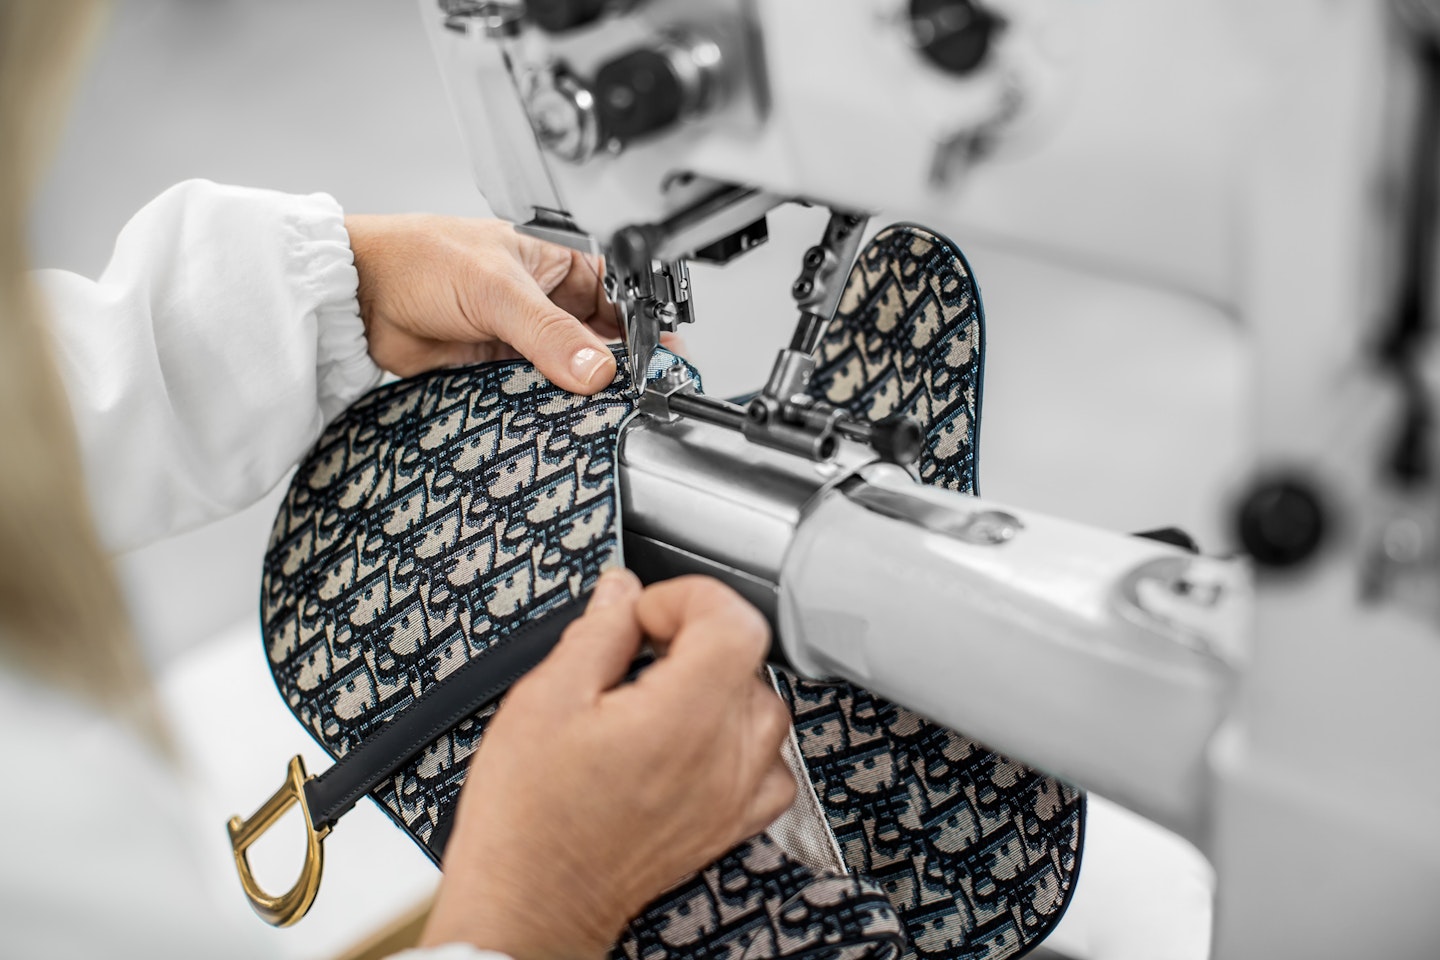 Behind The Scenes Of The Dior Saddle Bag Ressurection - Grazia